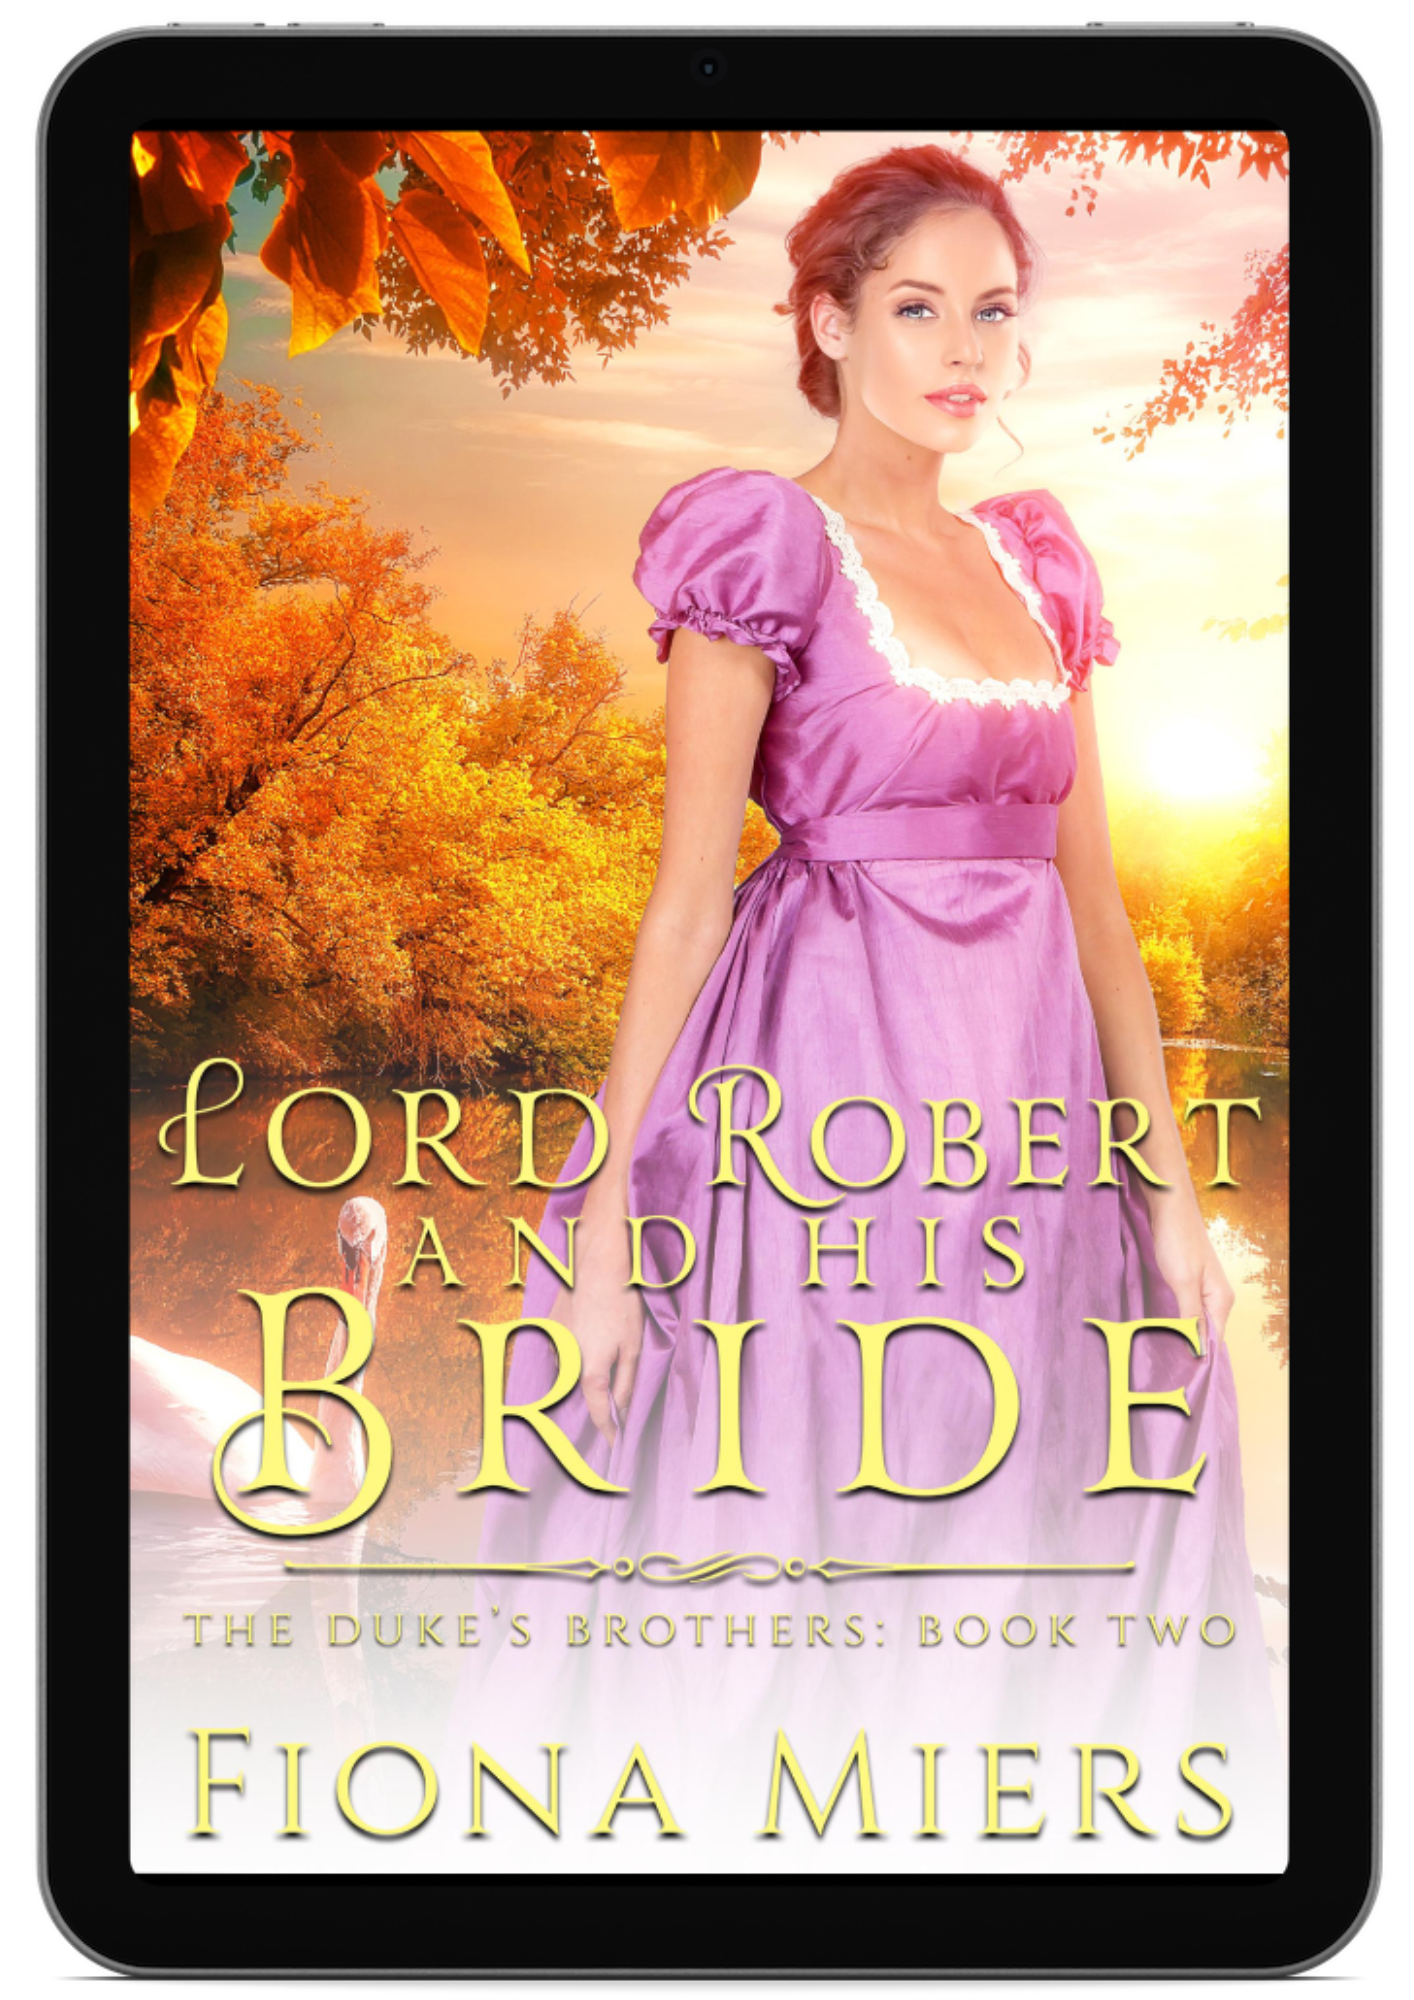 Lord Robert and his Bride | Book 2 - The Duke's Brothers